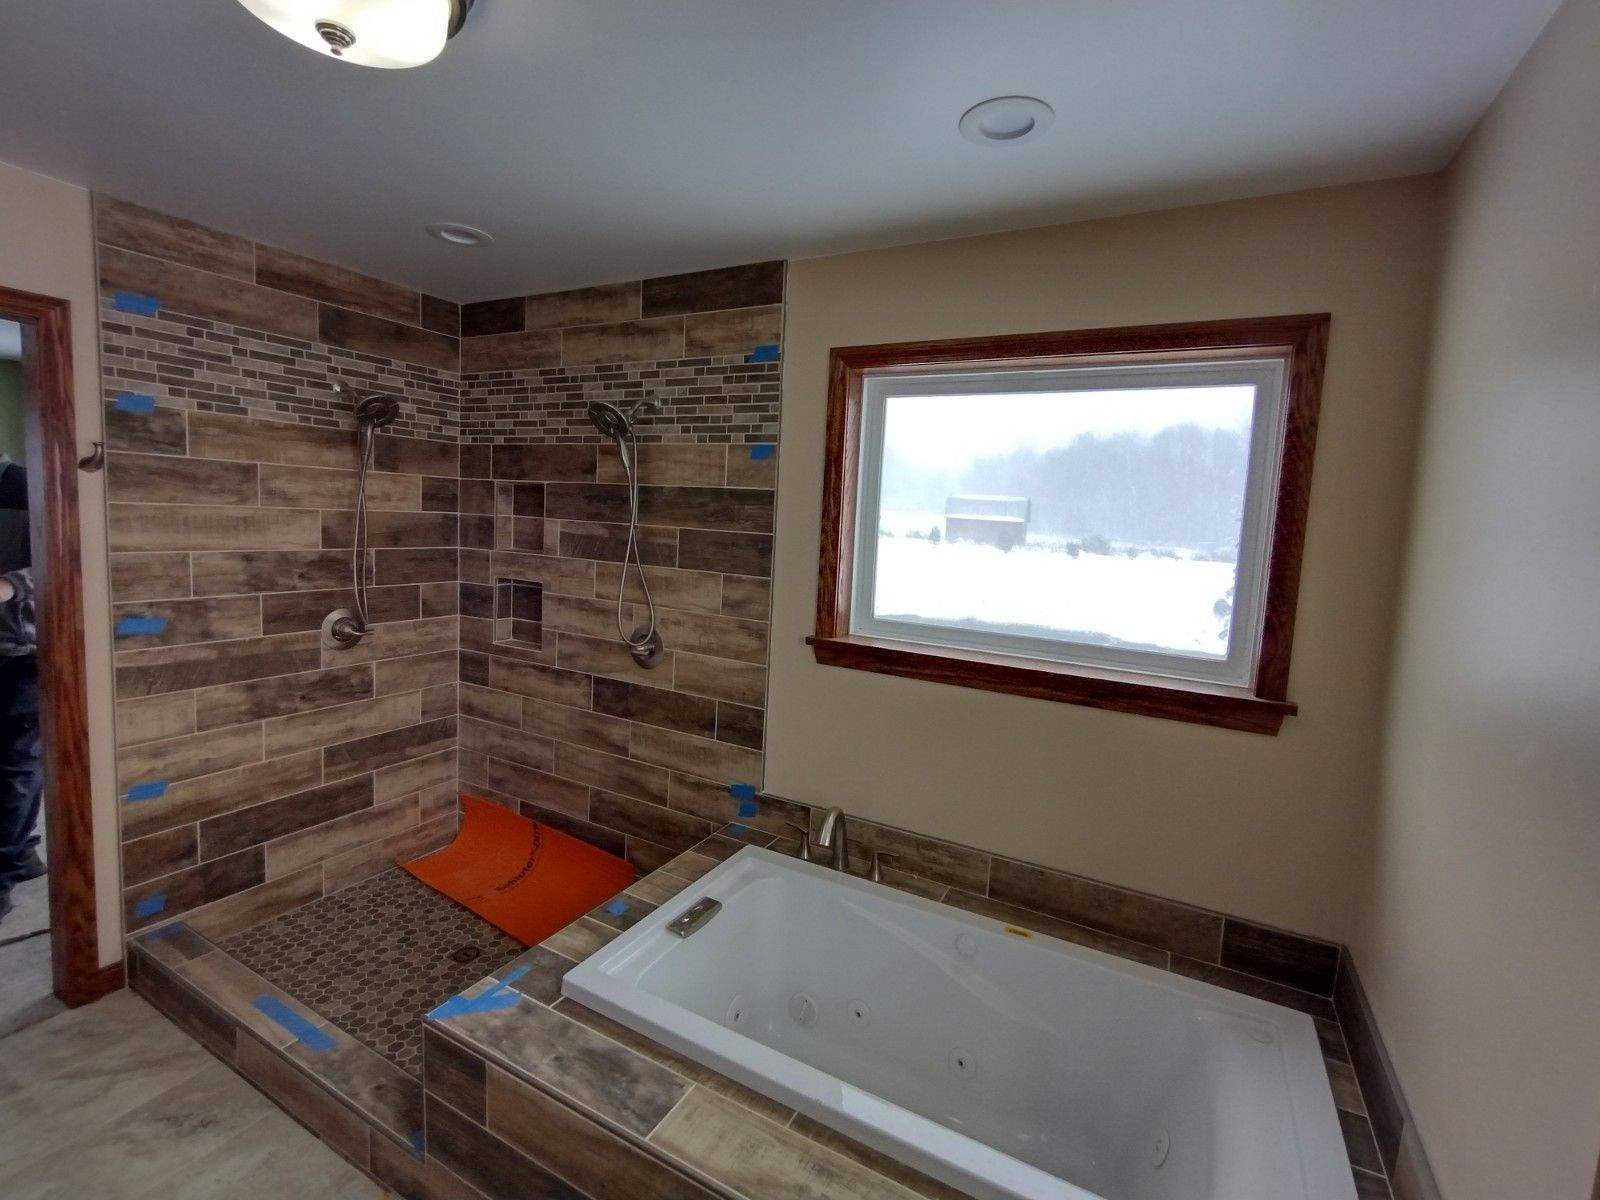 A bathroom with a tub , shower , and window.